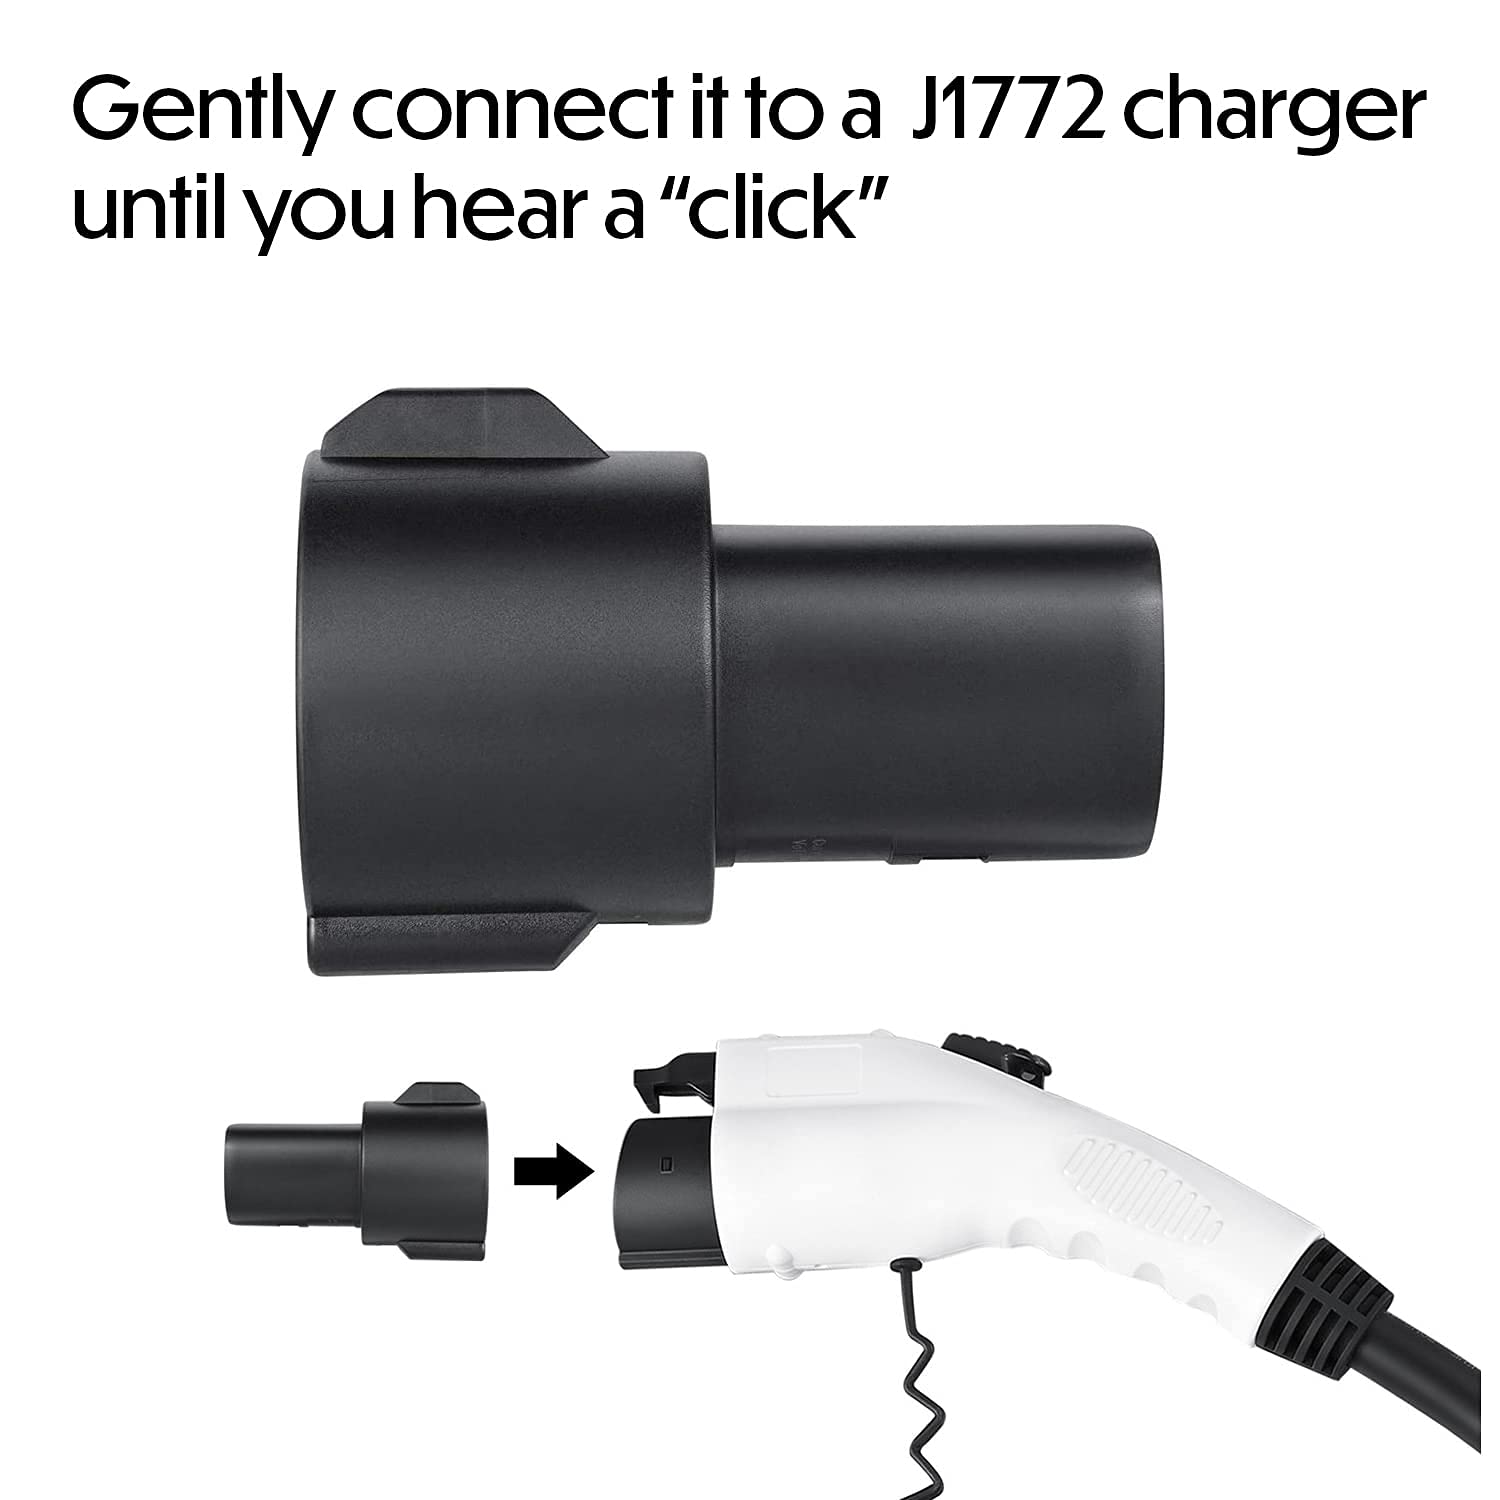 J1772 to Tesla Charging Adapter, Maximize EV Charging Options Compatible  with Tesla Model 3, Y, S, x for Level 1 Level 2 Charging Stations SAE J1772